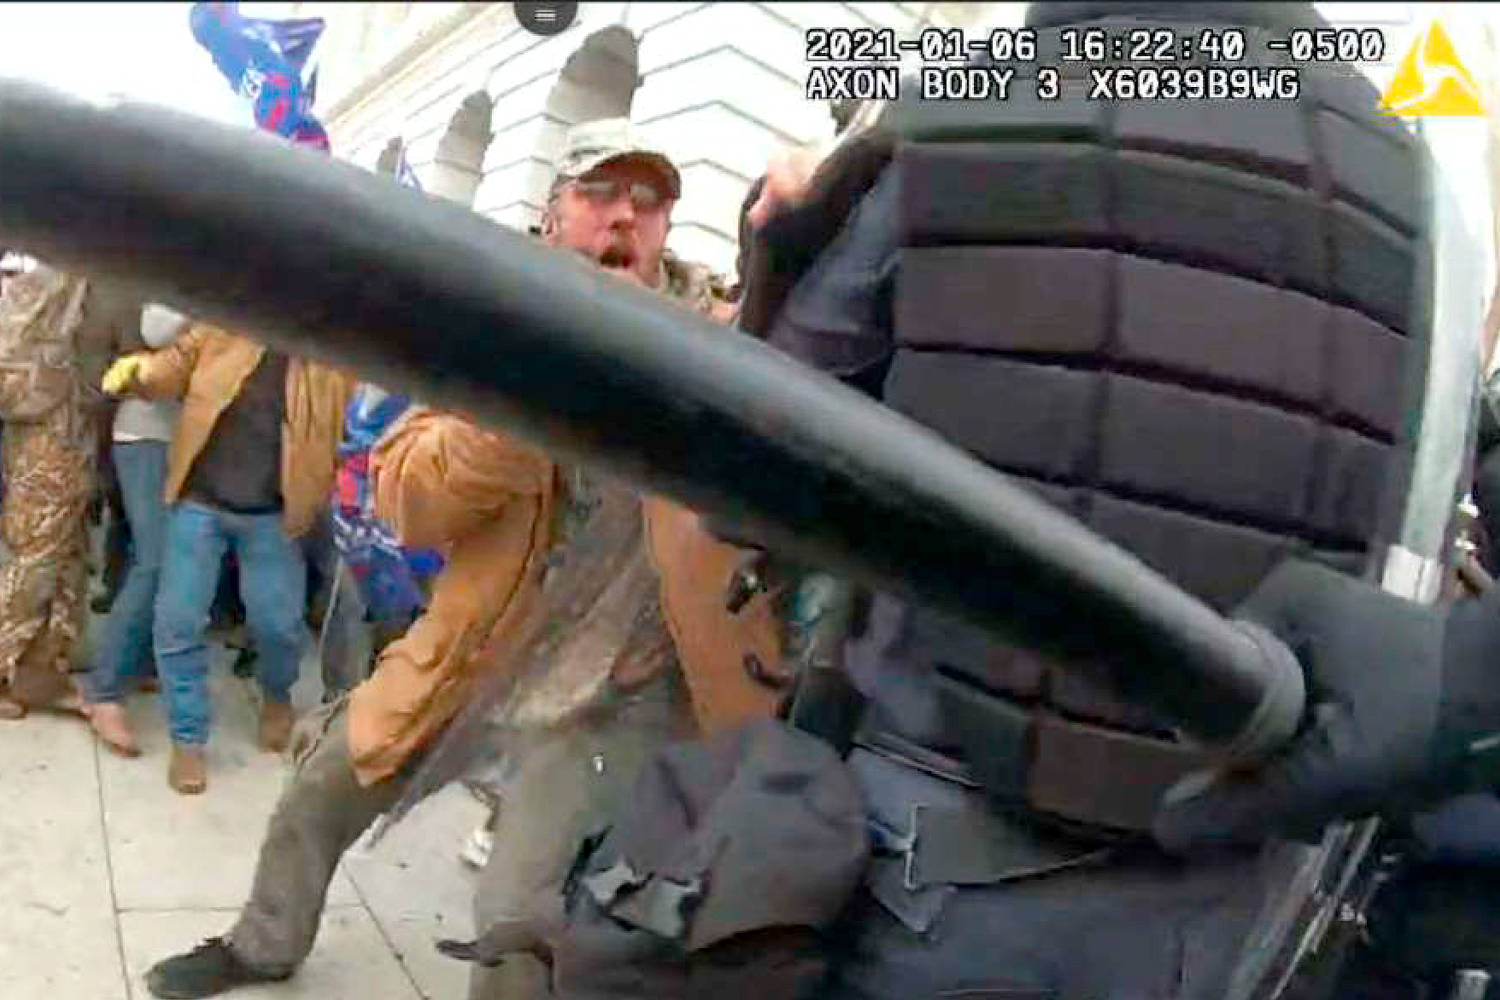 Ohio man sentenced to nearly 5 years for attacks on police during Capitol riot